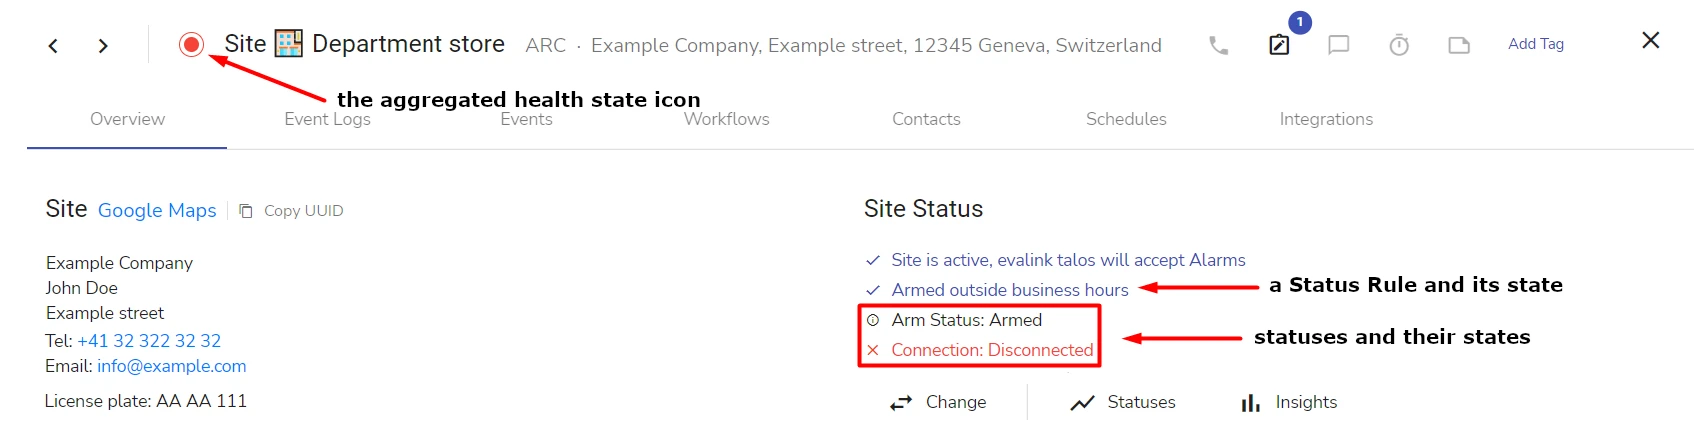 Site statuses and Status Rules on the site Overview page